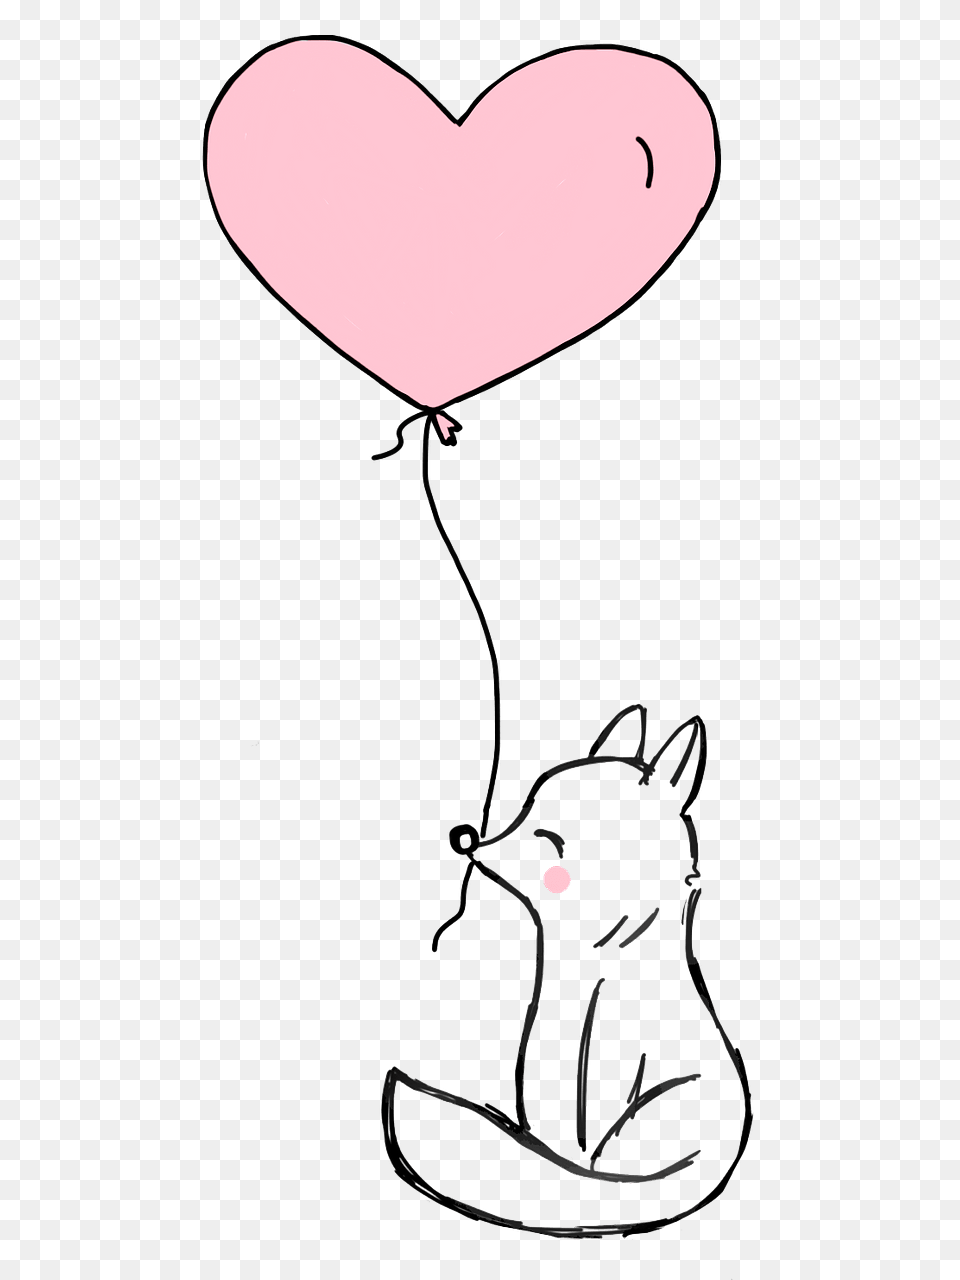 Fox With Heart Balloon Clipart Free Png